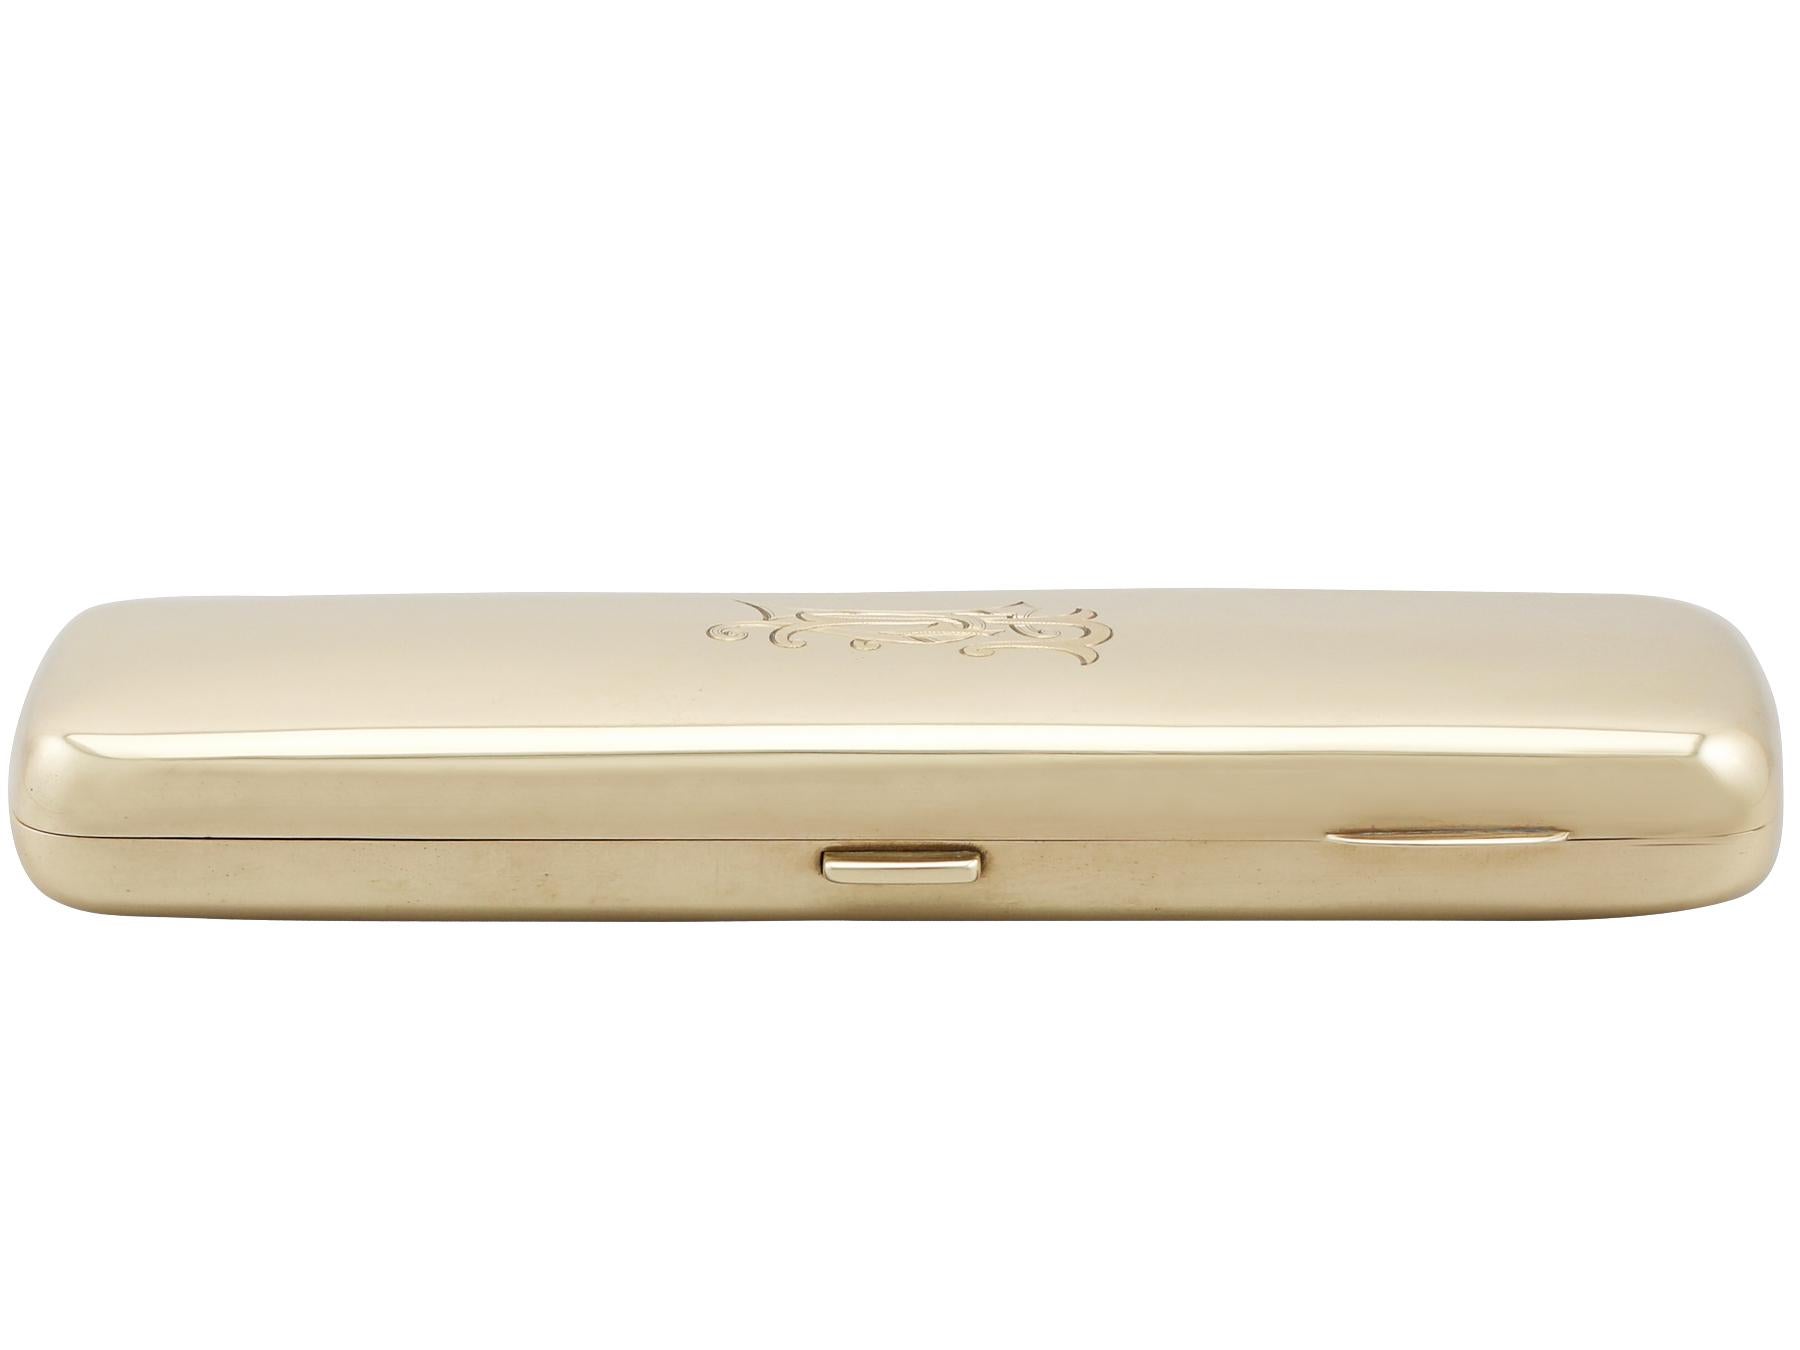 An exceptional, fine and impressive antique George V English 9-karat yellow gold cigar/cheroot case; an addition to our smoking related collection.

This exceptional antique George V 9-karat yellow gold cheroot/cigar case has a plain rectangular